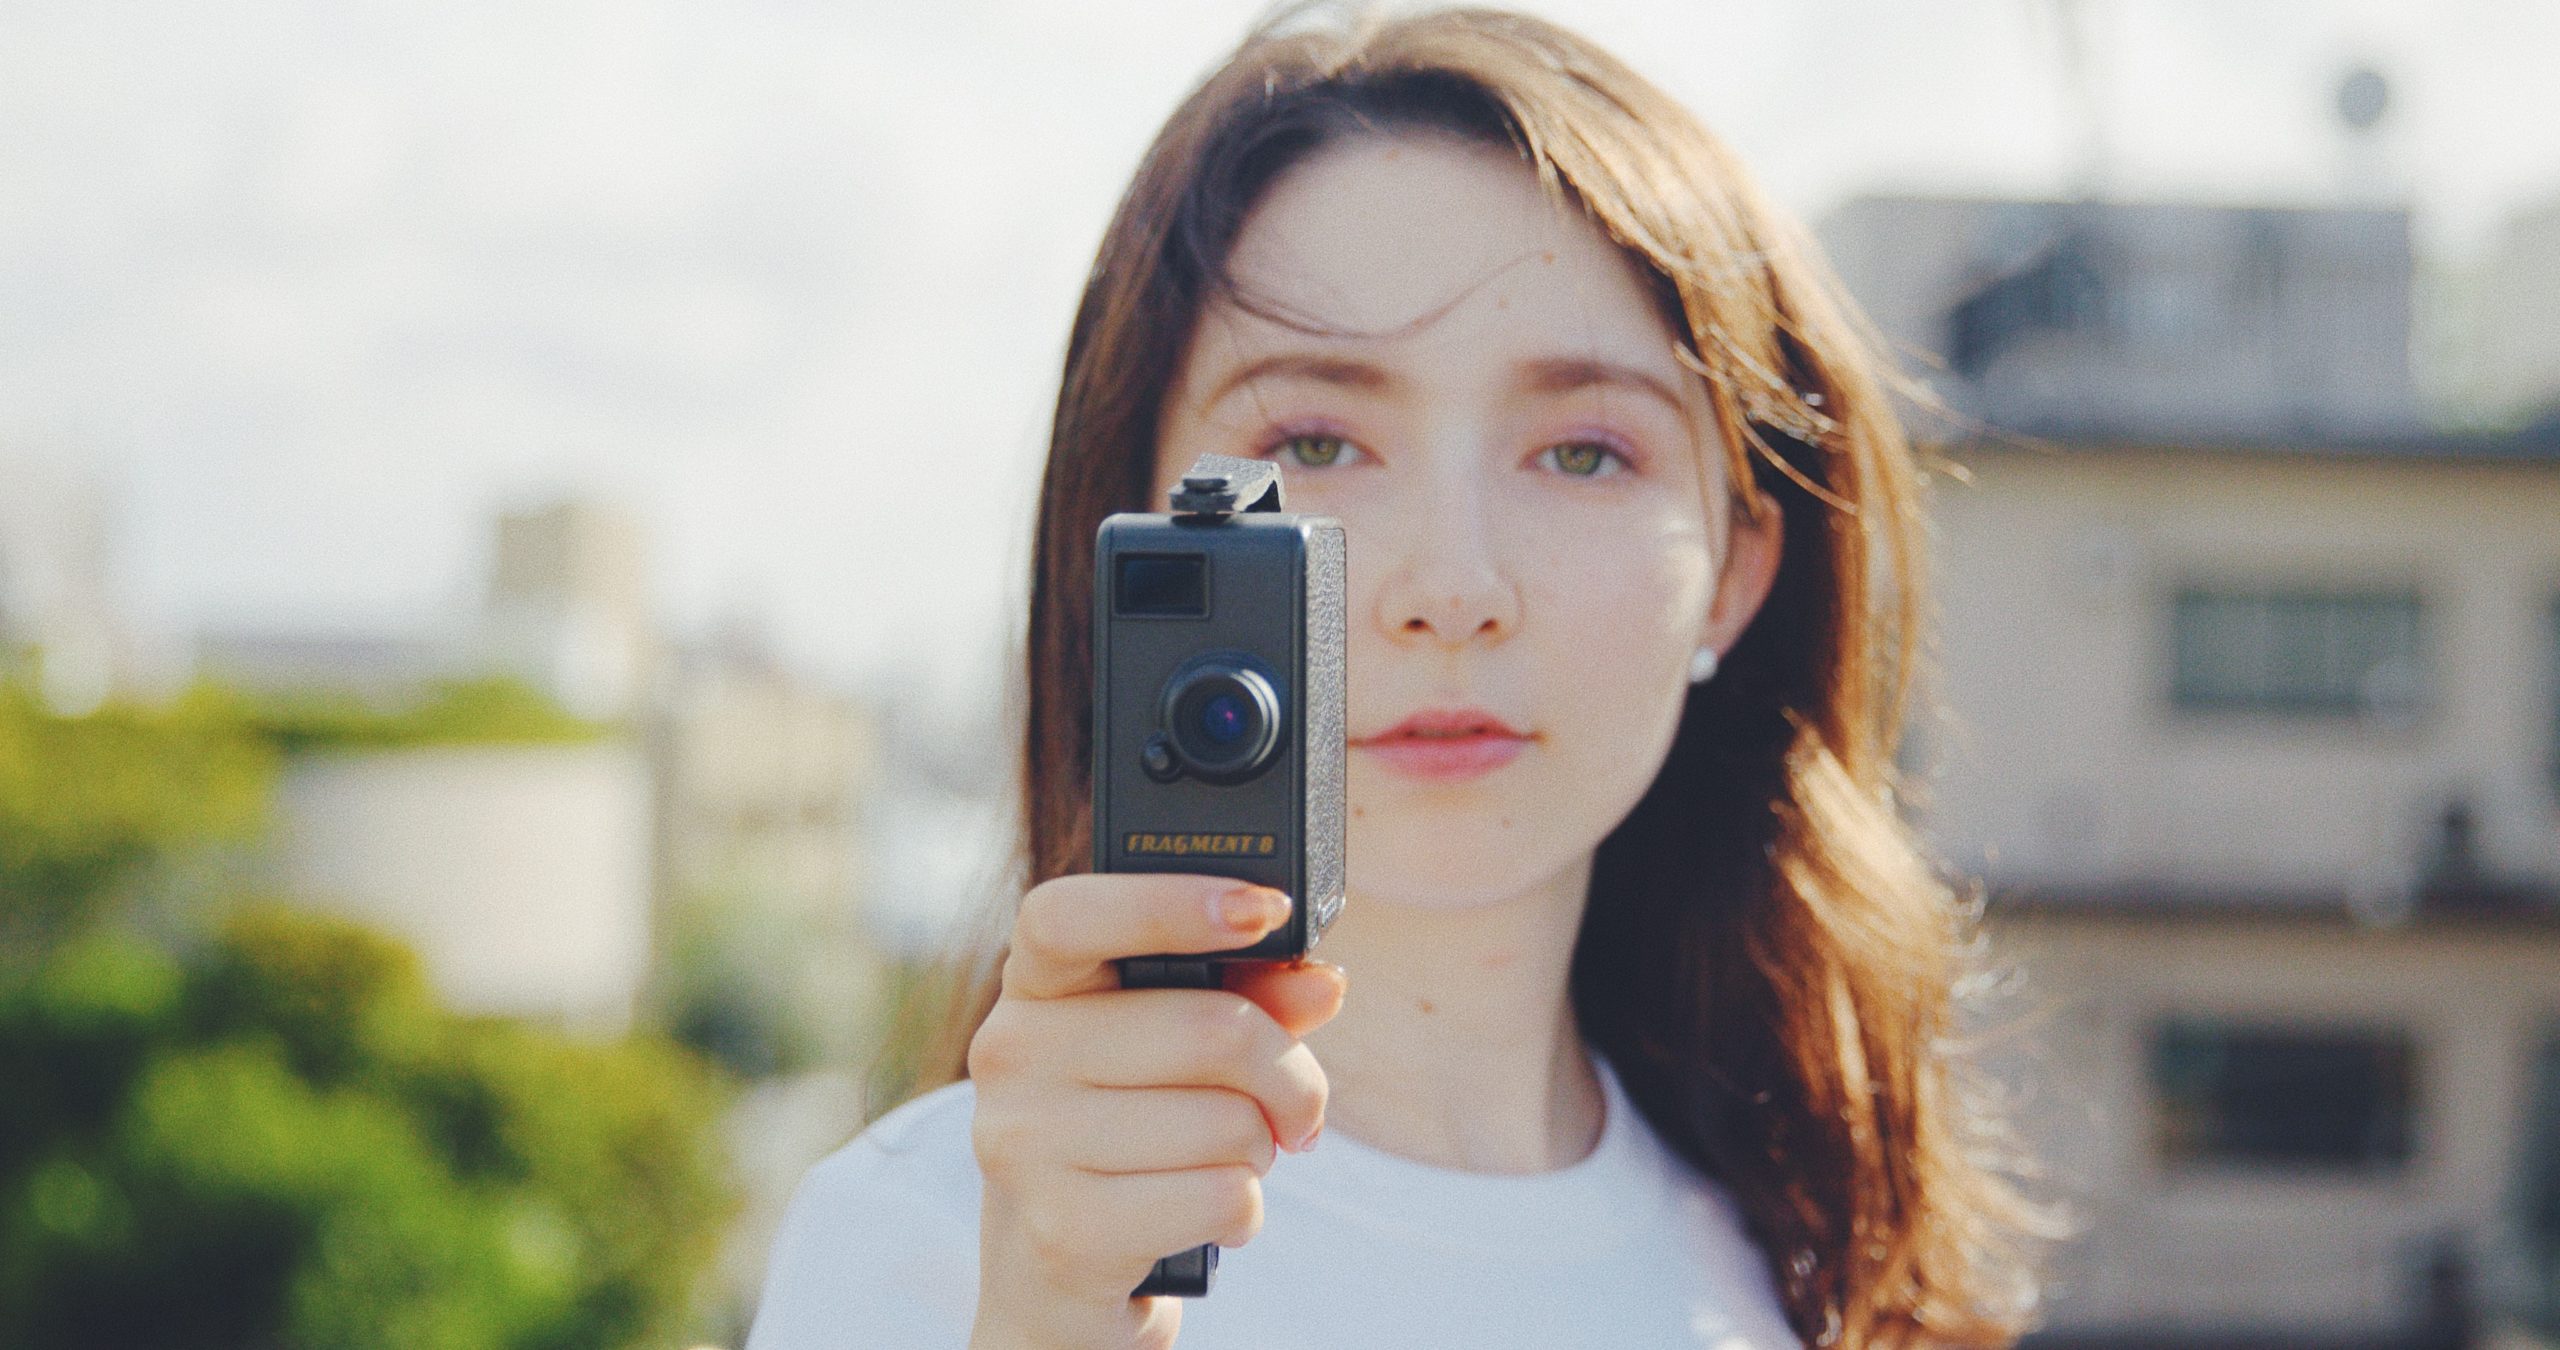 Fragment 8 Is a Digital Revival of the Iconic Super 8 Camera